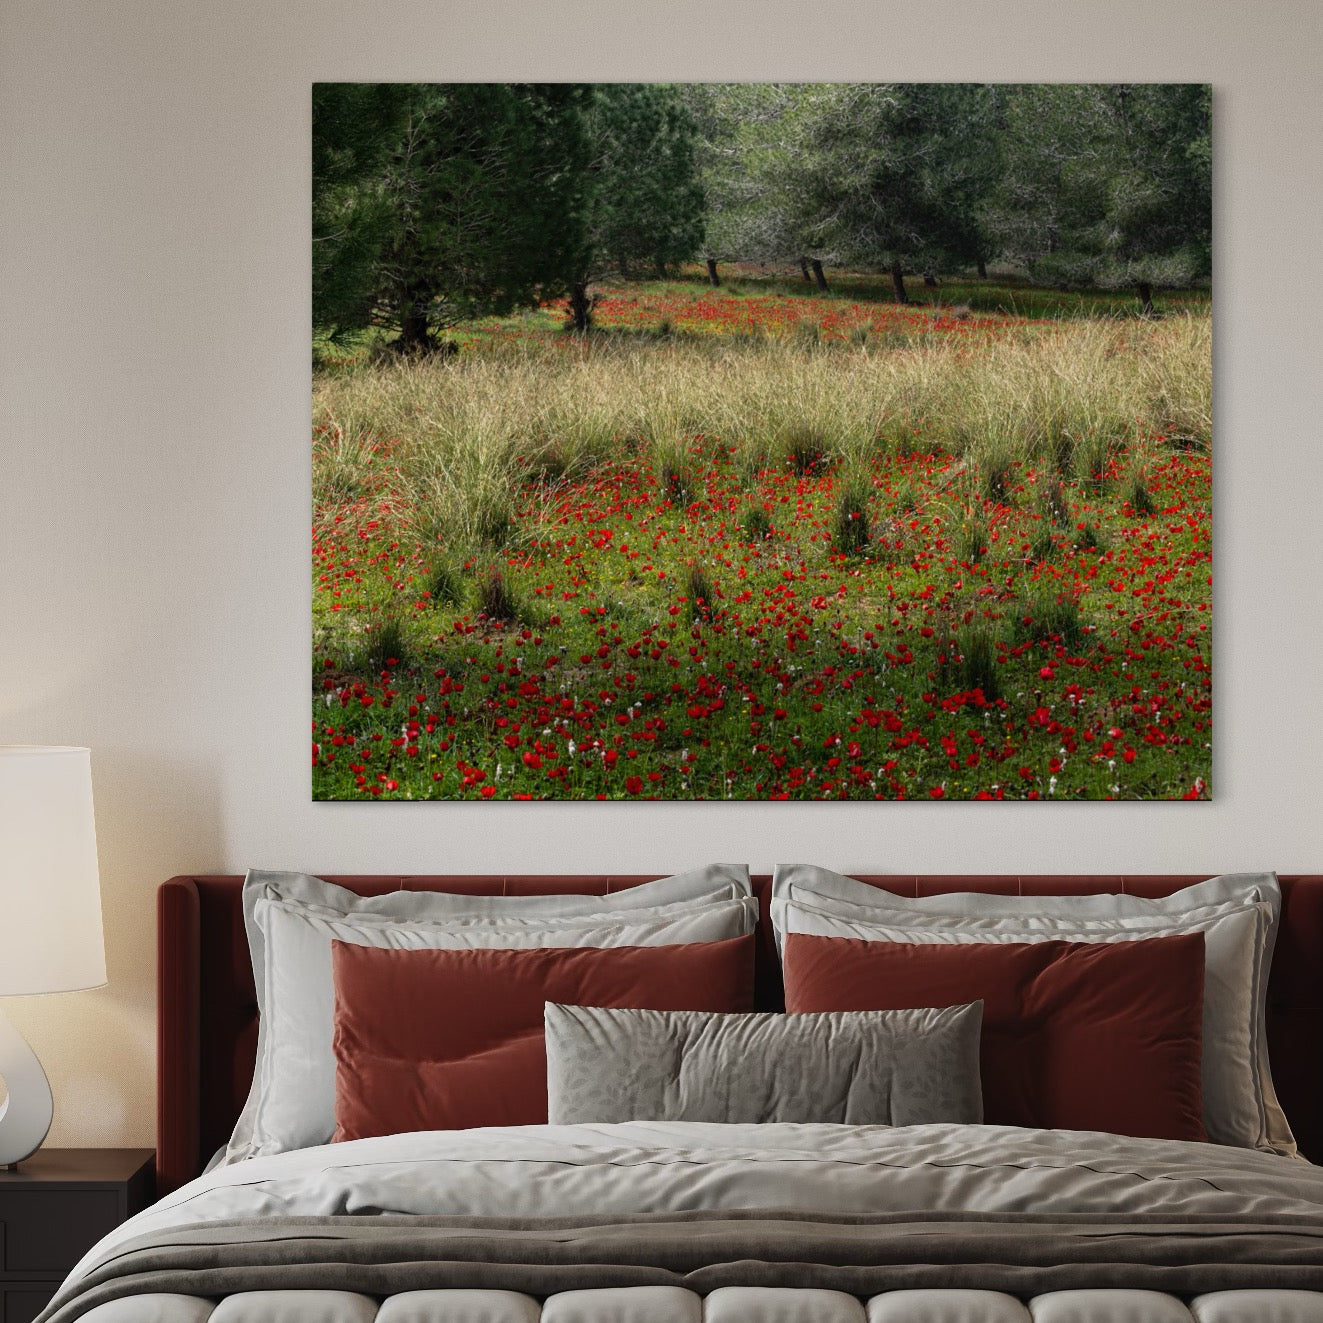 Ela Valley Anemones by Yehoshua Halevi - Photograph on Glossy Acrylic (French Cleat Hanging)